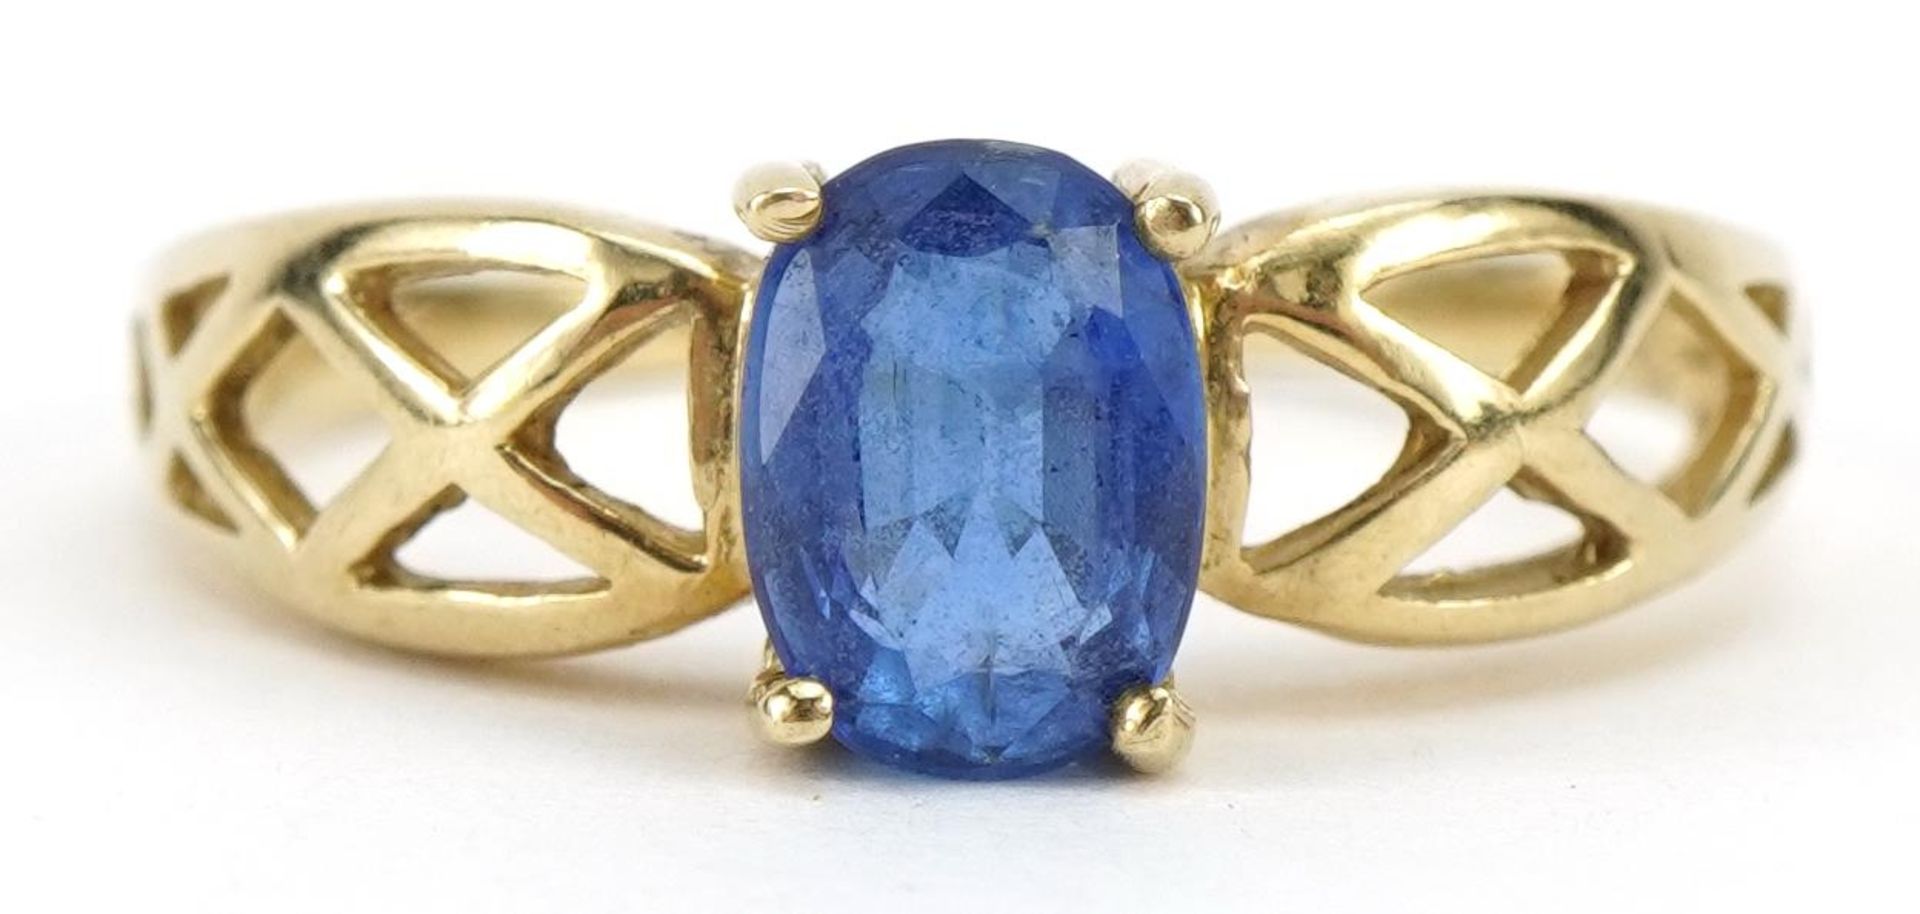 9ct gold tanzanite solitaire ring with Celtic design shoulders, the tanzanite approximately 7mm x